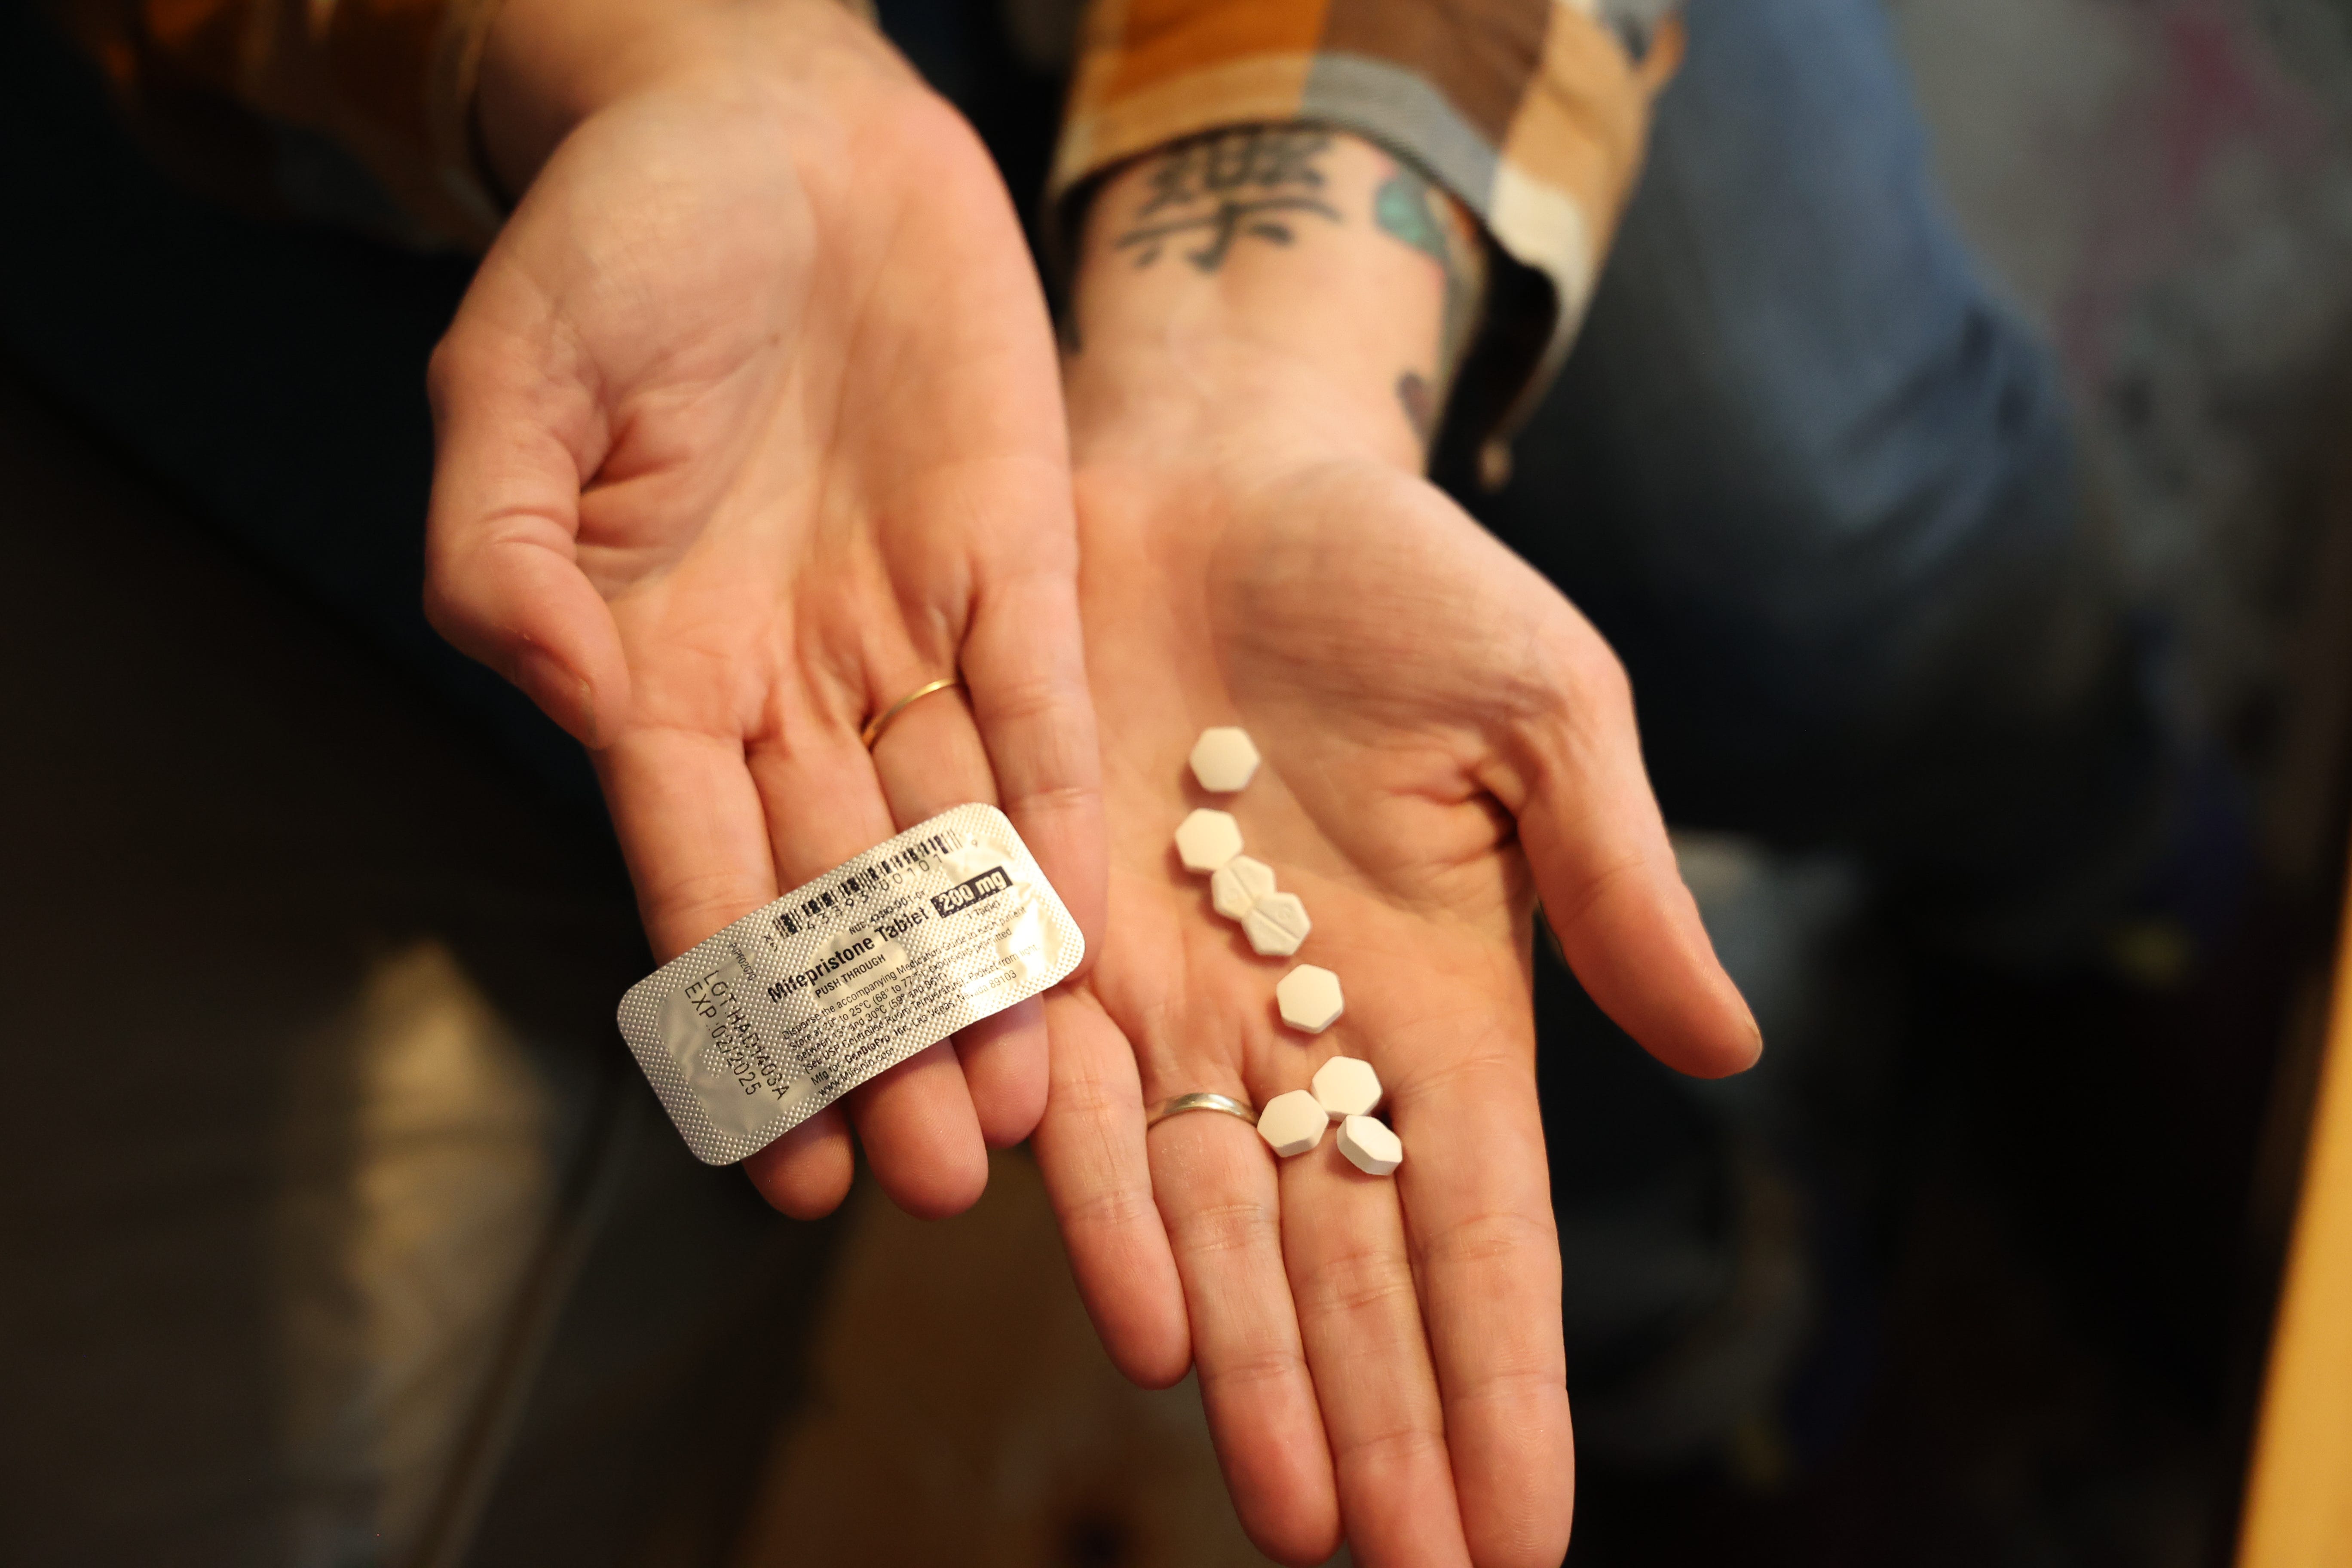 Abortion pills, held by an advocate in Illinois.